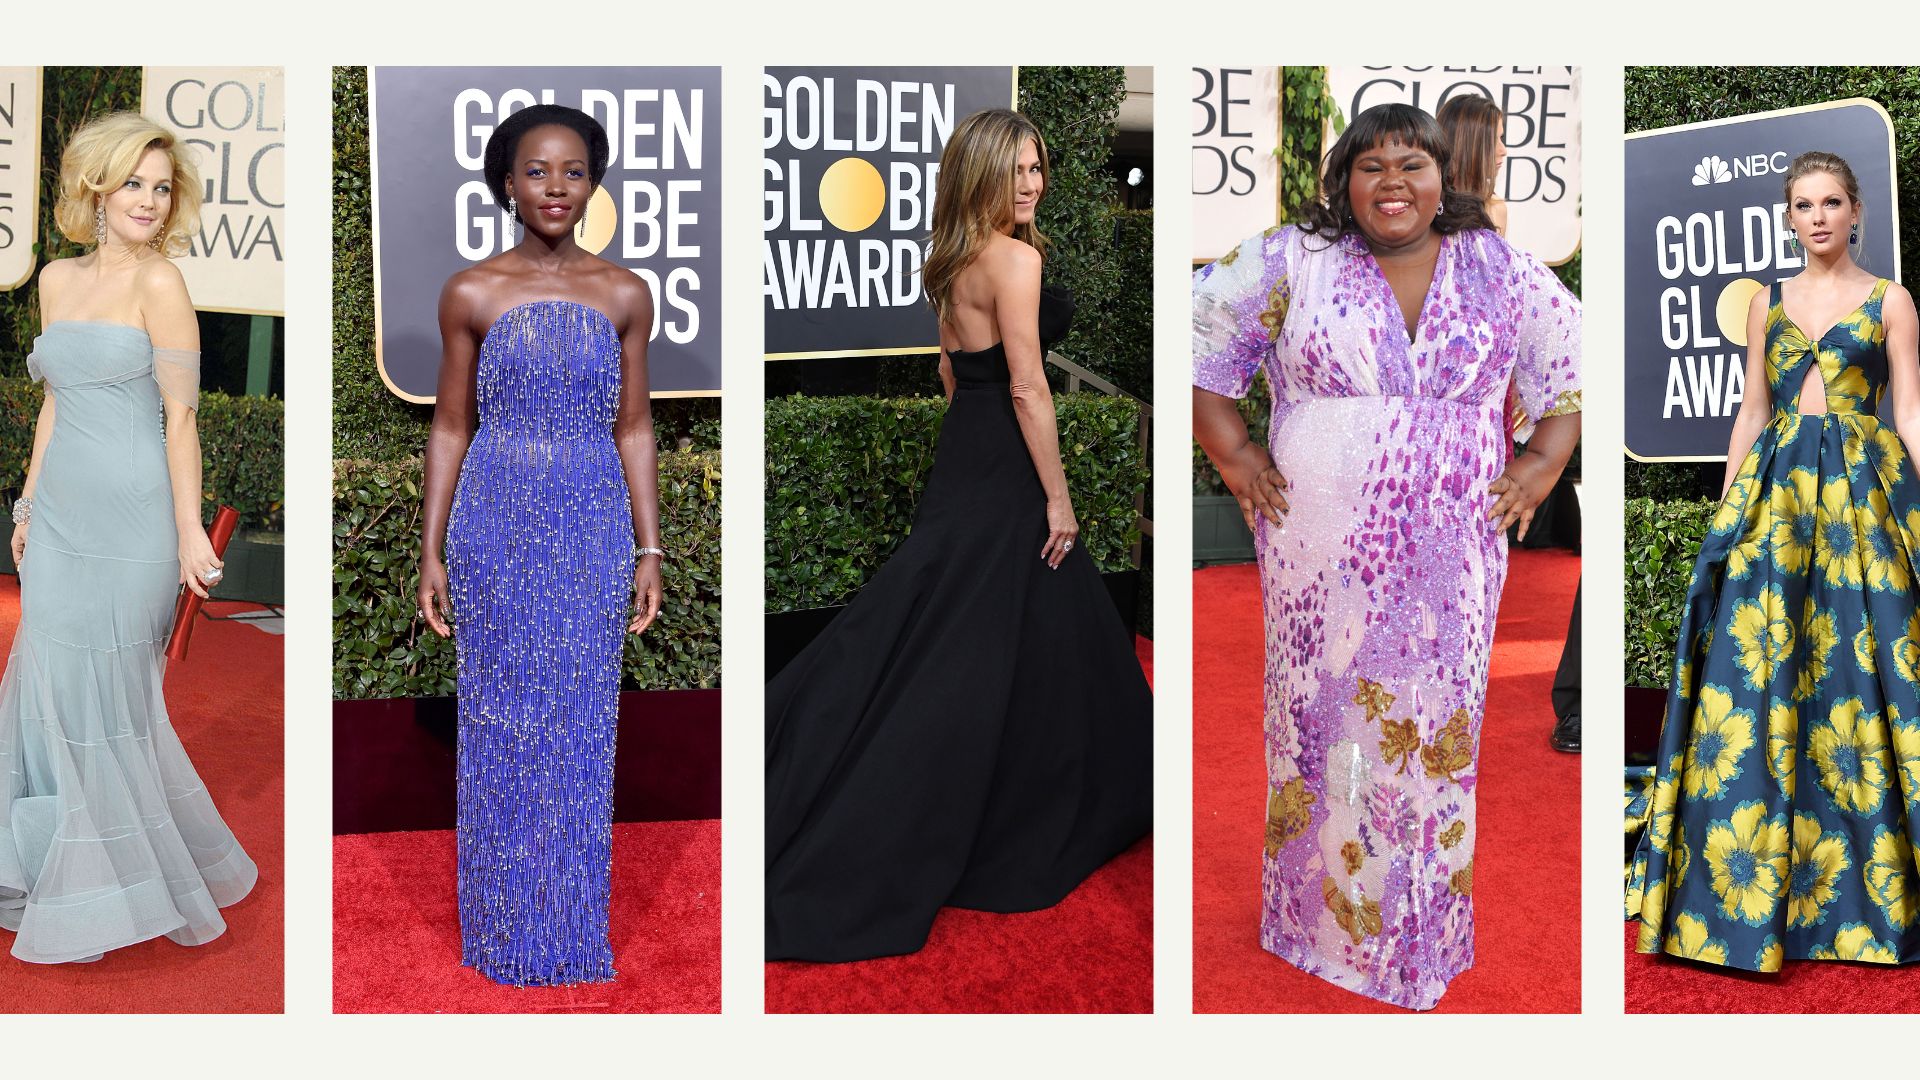 The 15 iconic Golden Globes dresses that we'll never forget